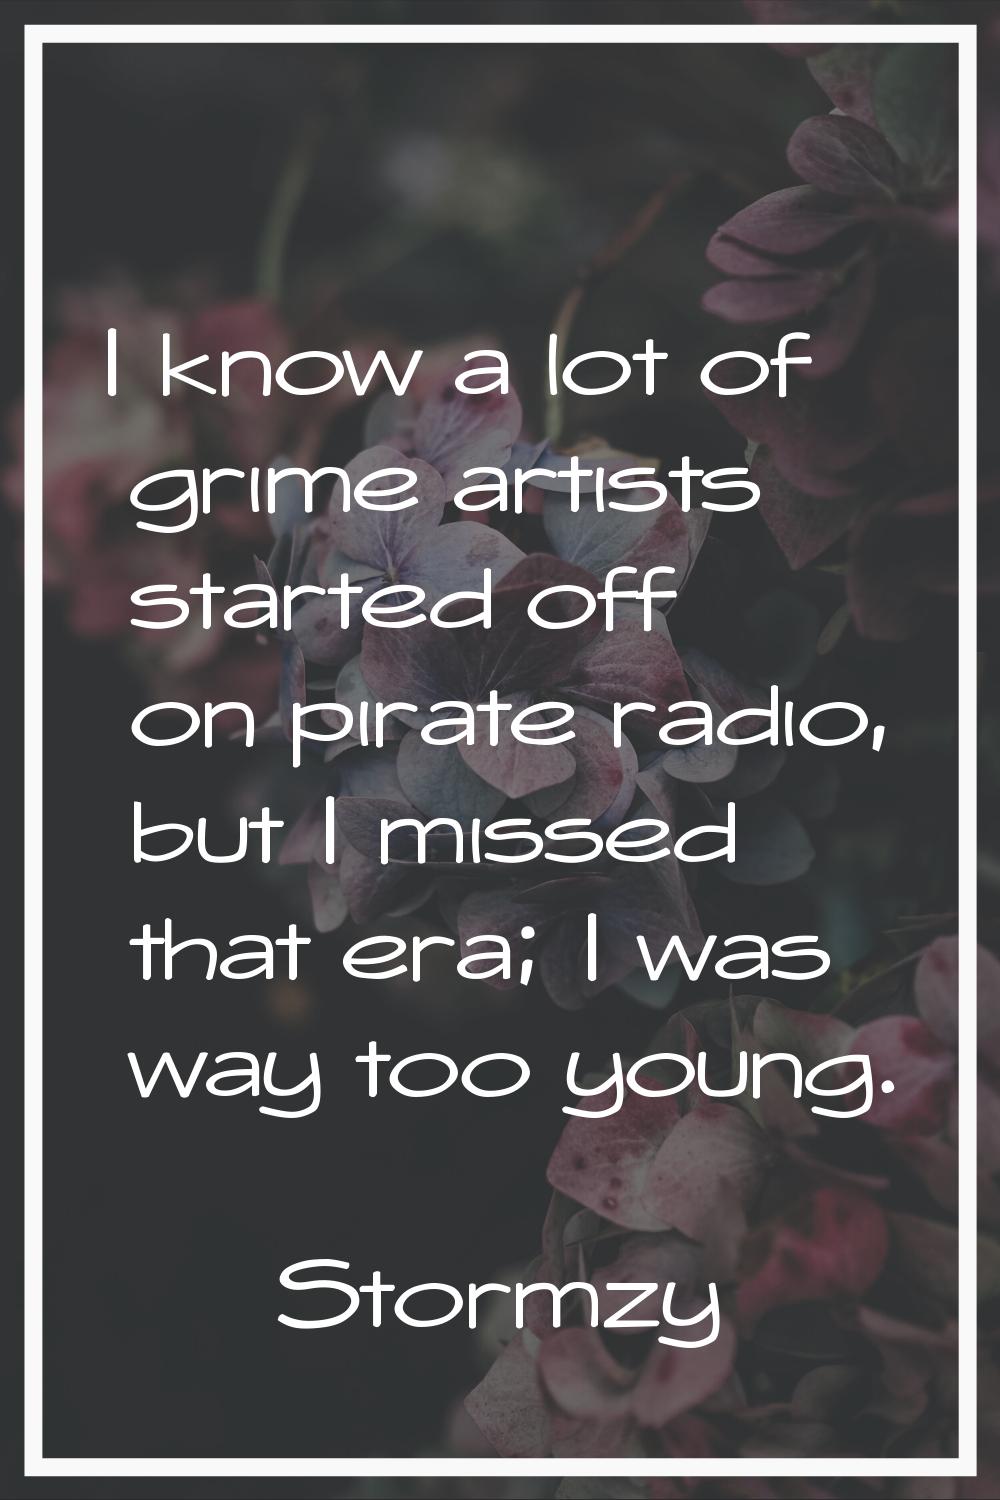 I know a lot of grime artists started off on pirate radio, but I missed that era; I was way too you